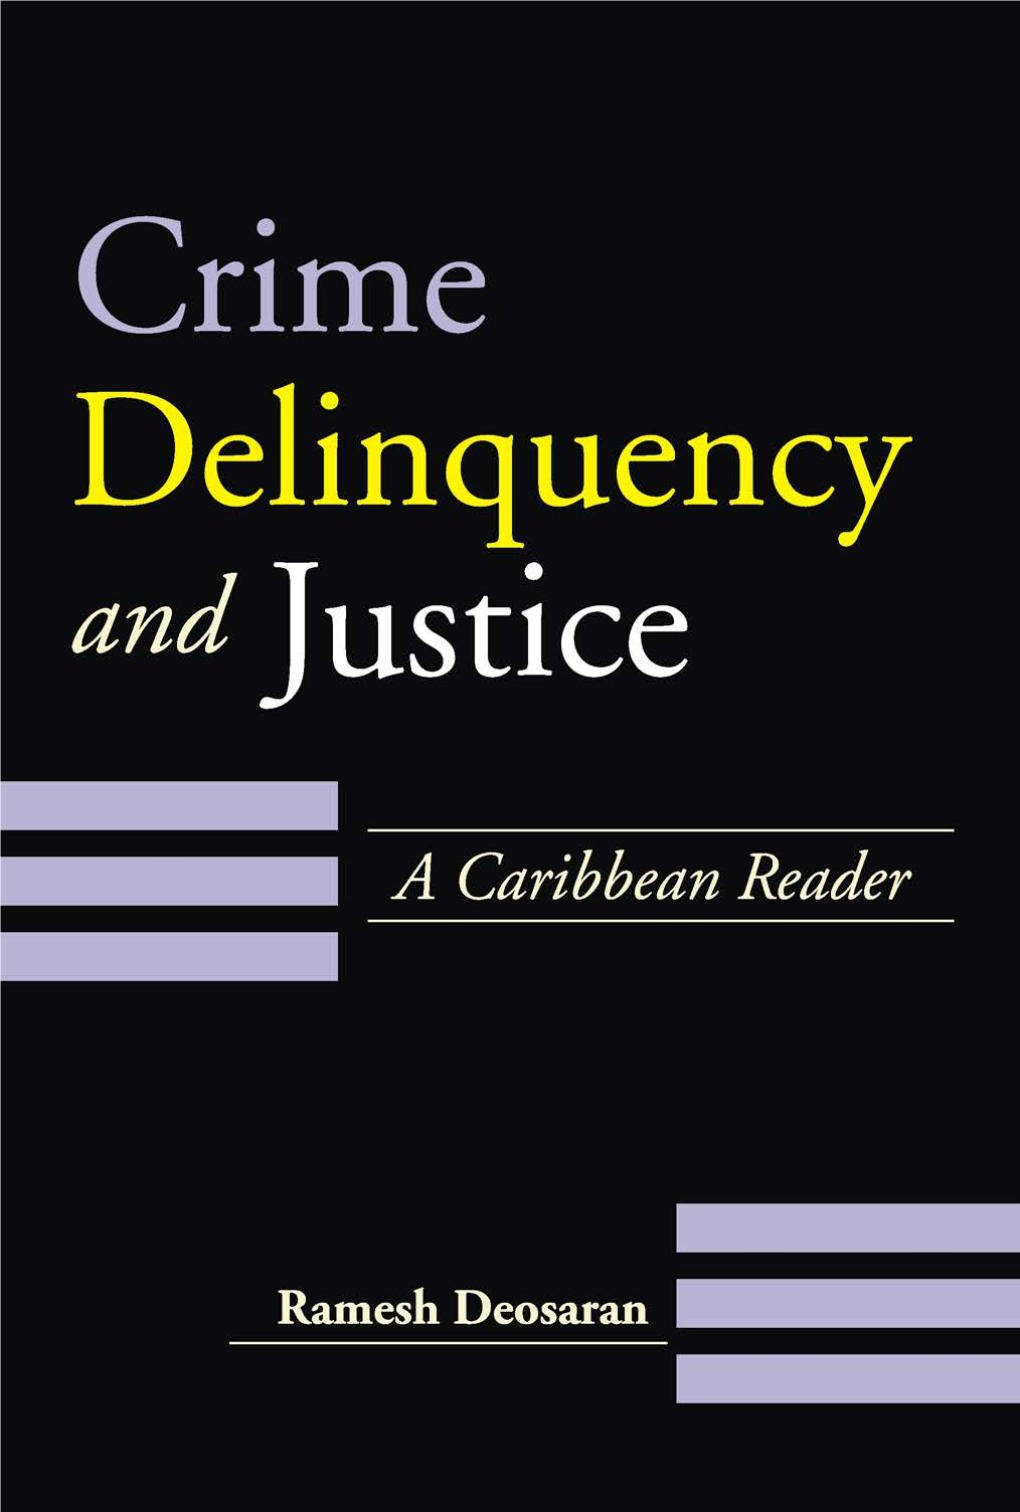 Crime, Delinquency and Justice: a Caribbean Reader